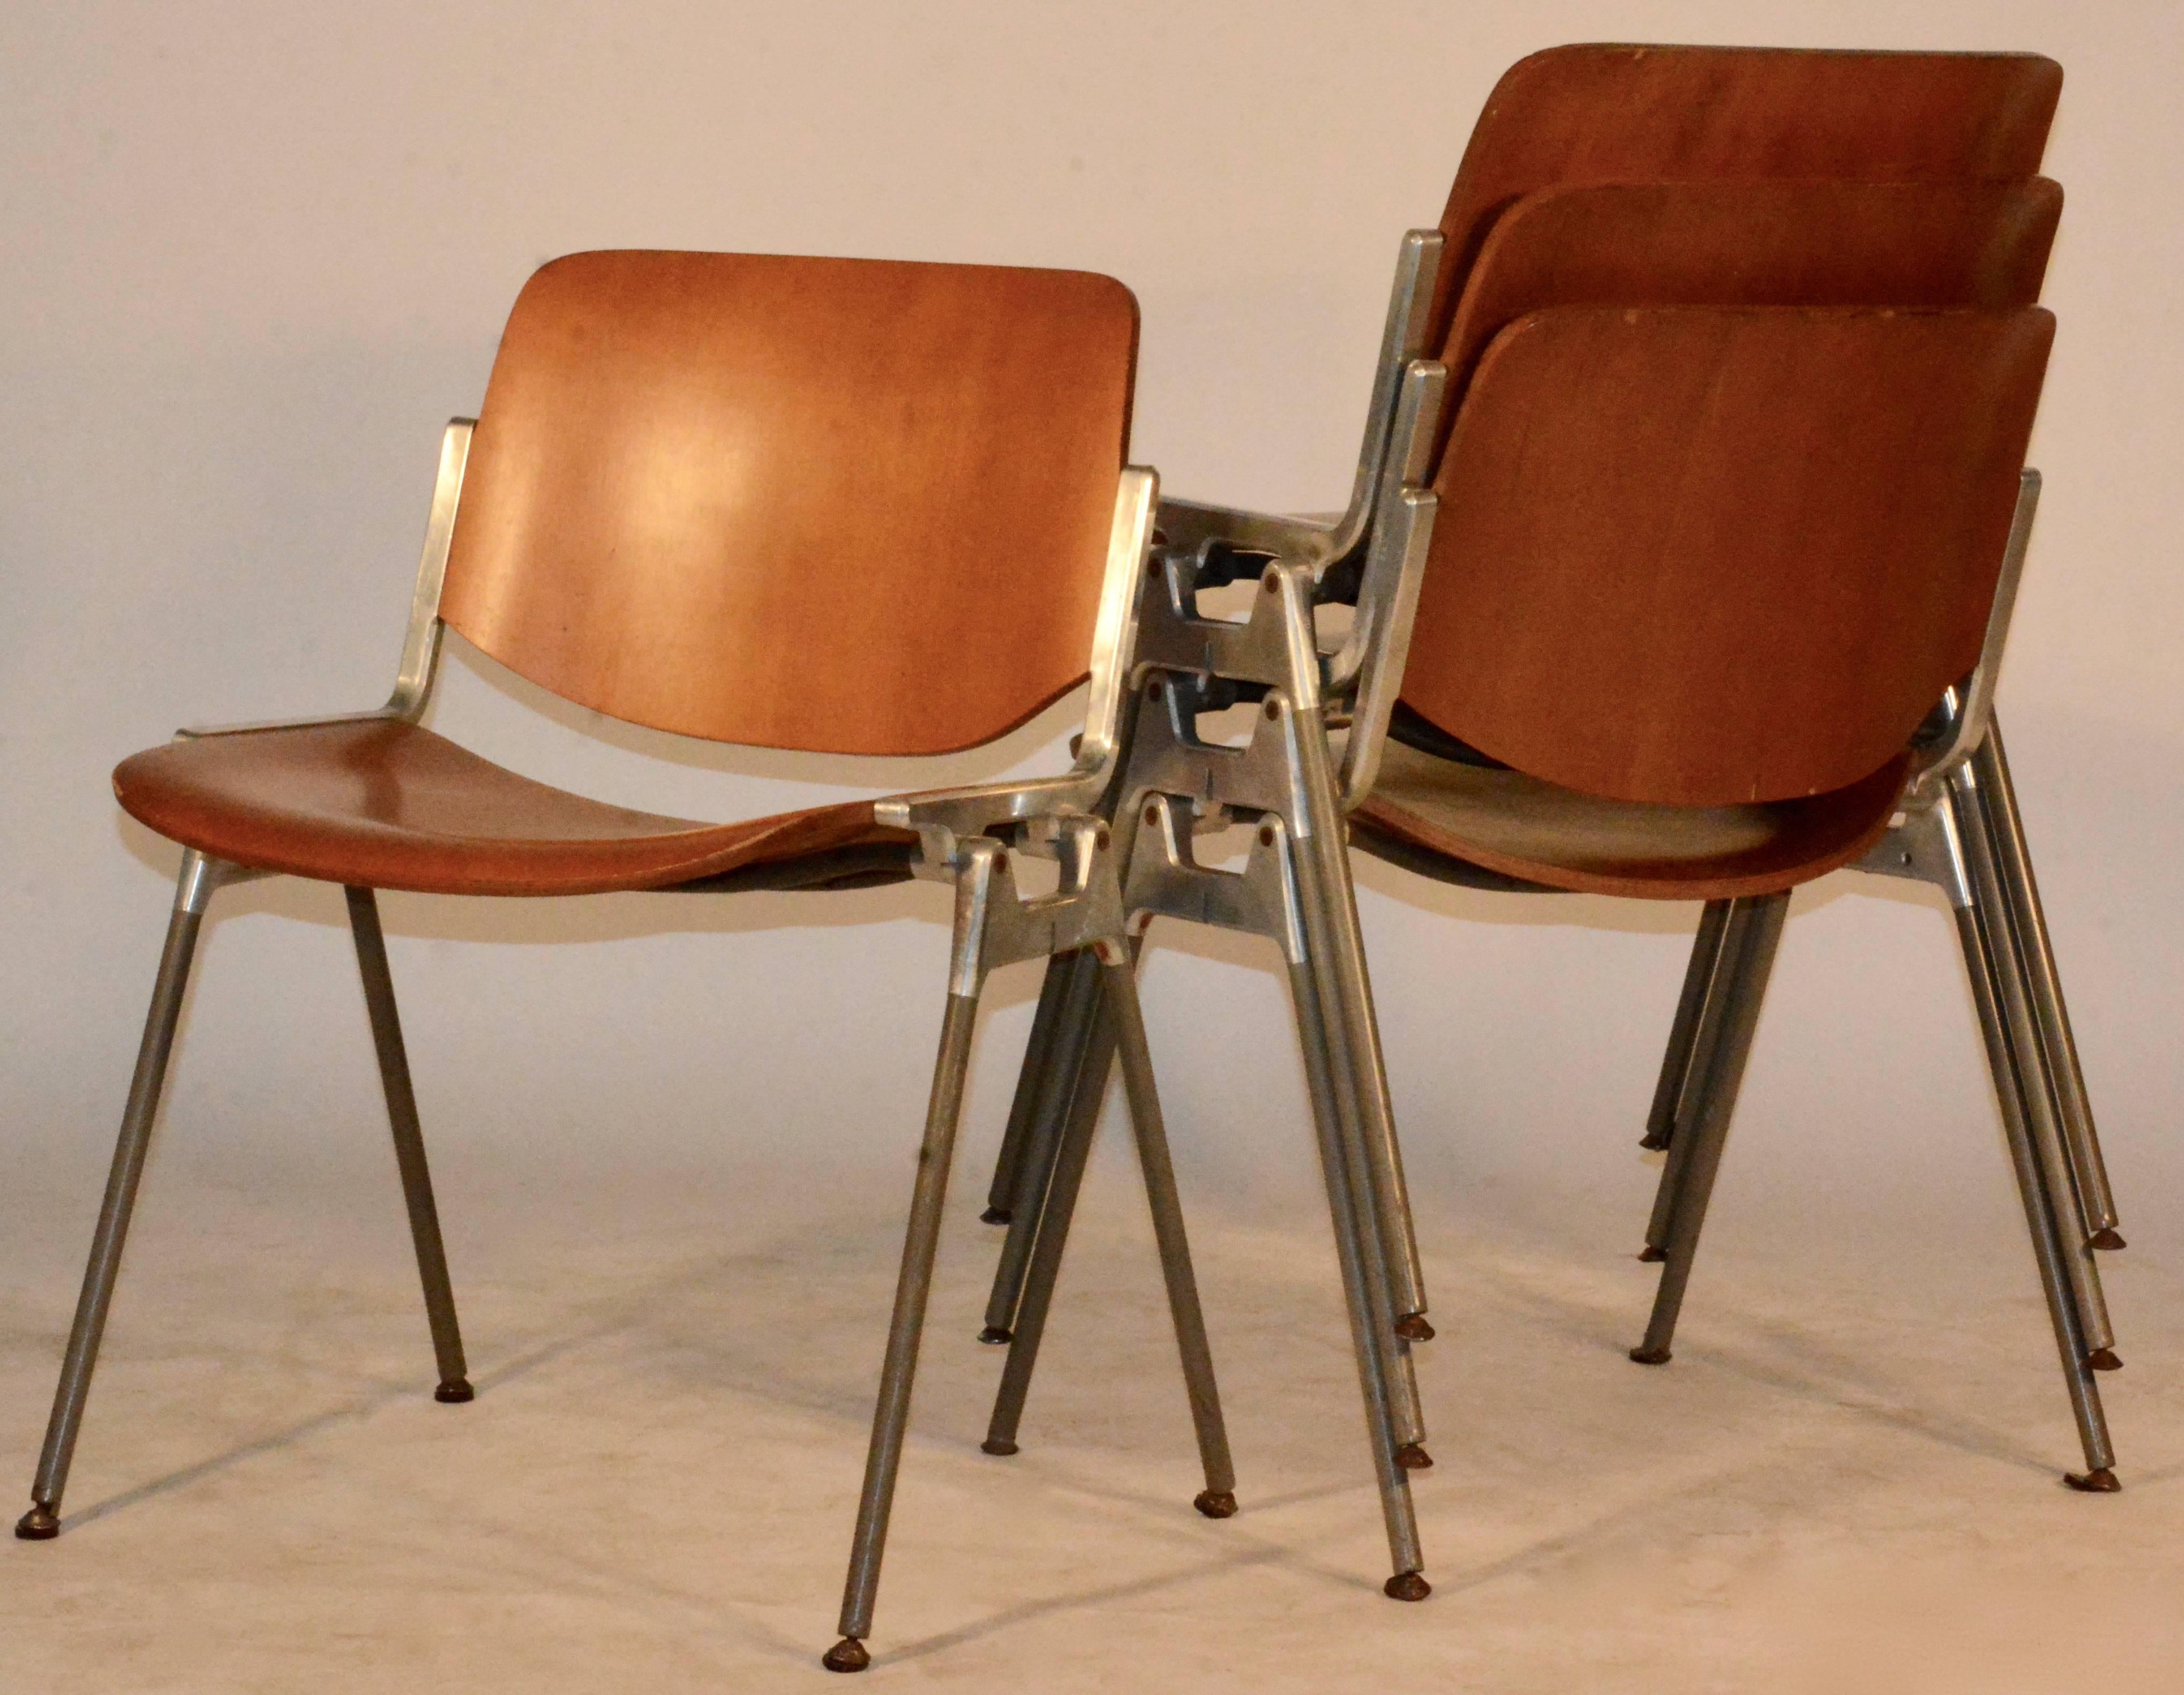 A set of four Mid-Century Modern Giancarlo Piretti DSC Axis 106 conference chairs by Castelli. These Italian stacking chairs feature carved pressed wood backs and seats stained in a warm tone. The sturdy silver tone metal frames have four tapered